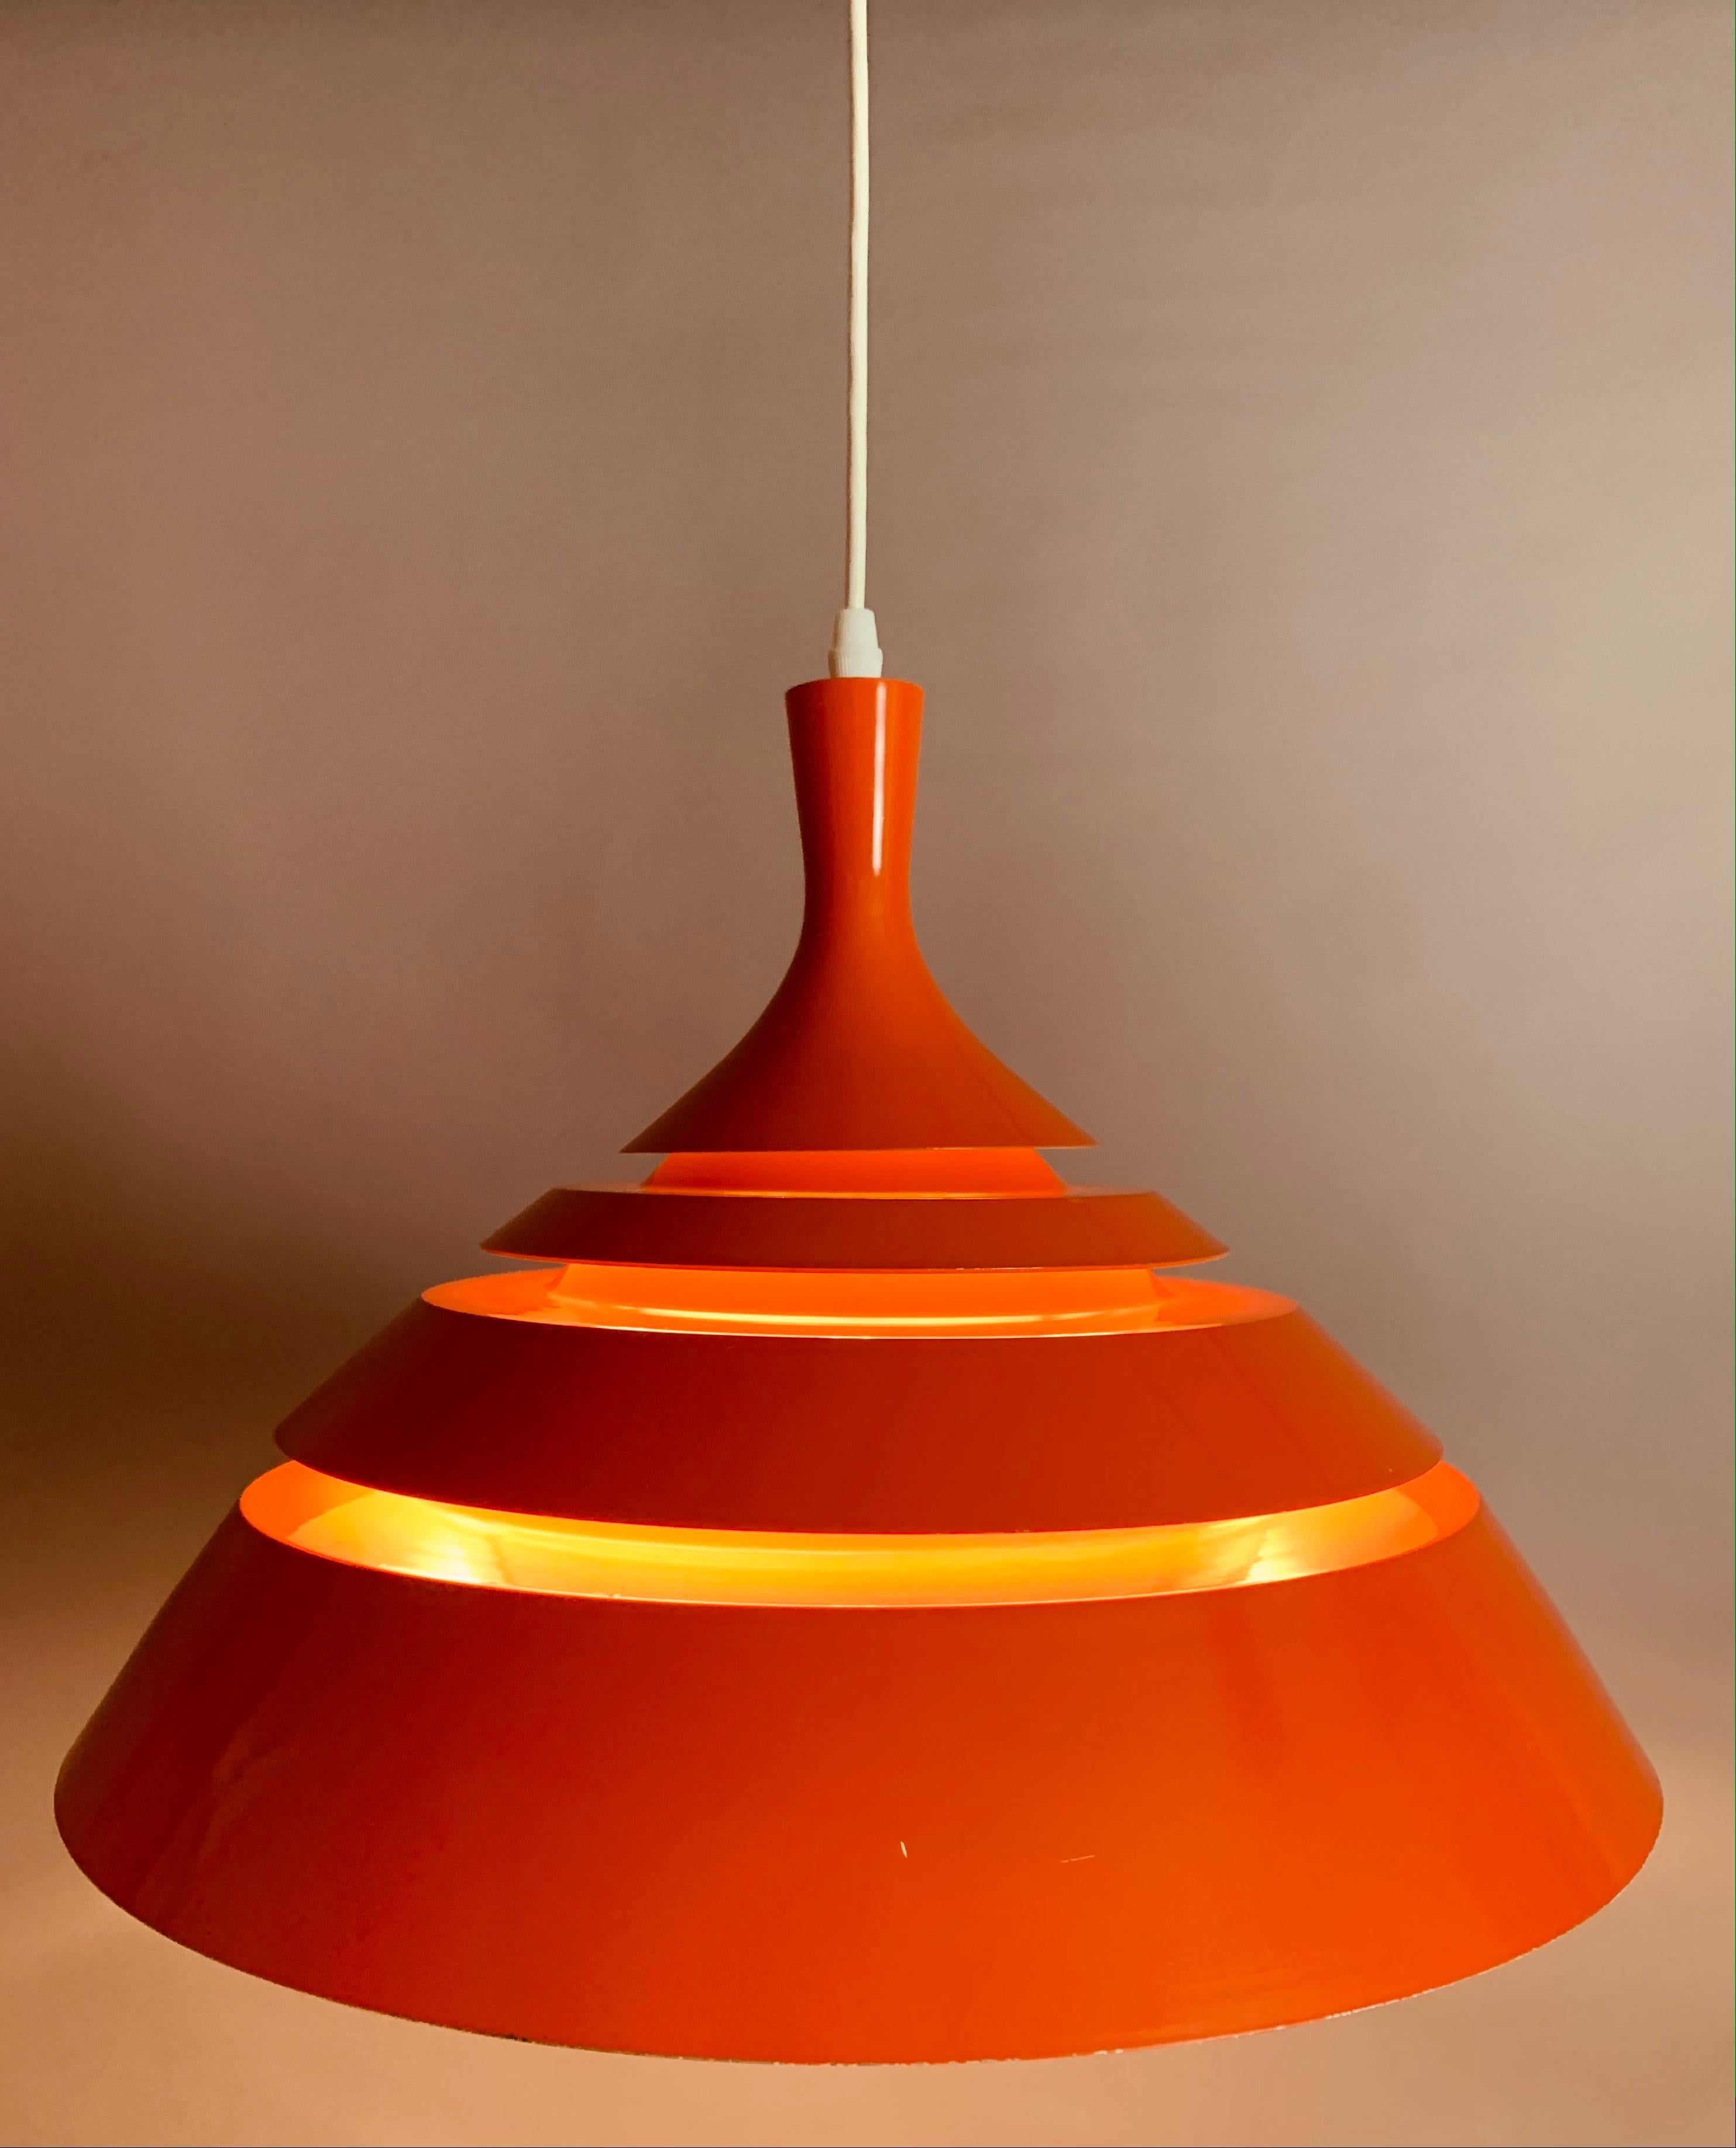 An unusual, space-age, modernist, hanging ceiling light. Designed by Hans-Agne Jakobsson during the 1960s in Sweden. The light is constructed from orange lacquered metal blades suspended from a white metal interior frame. The light shines through